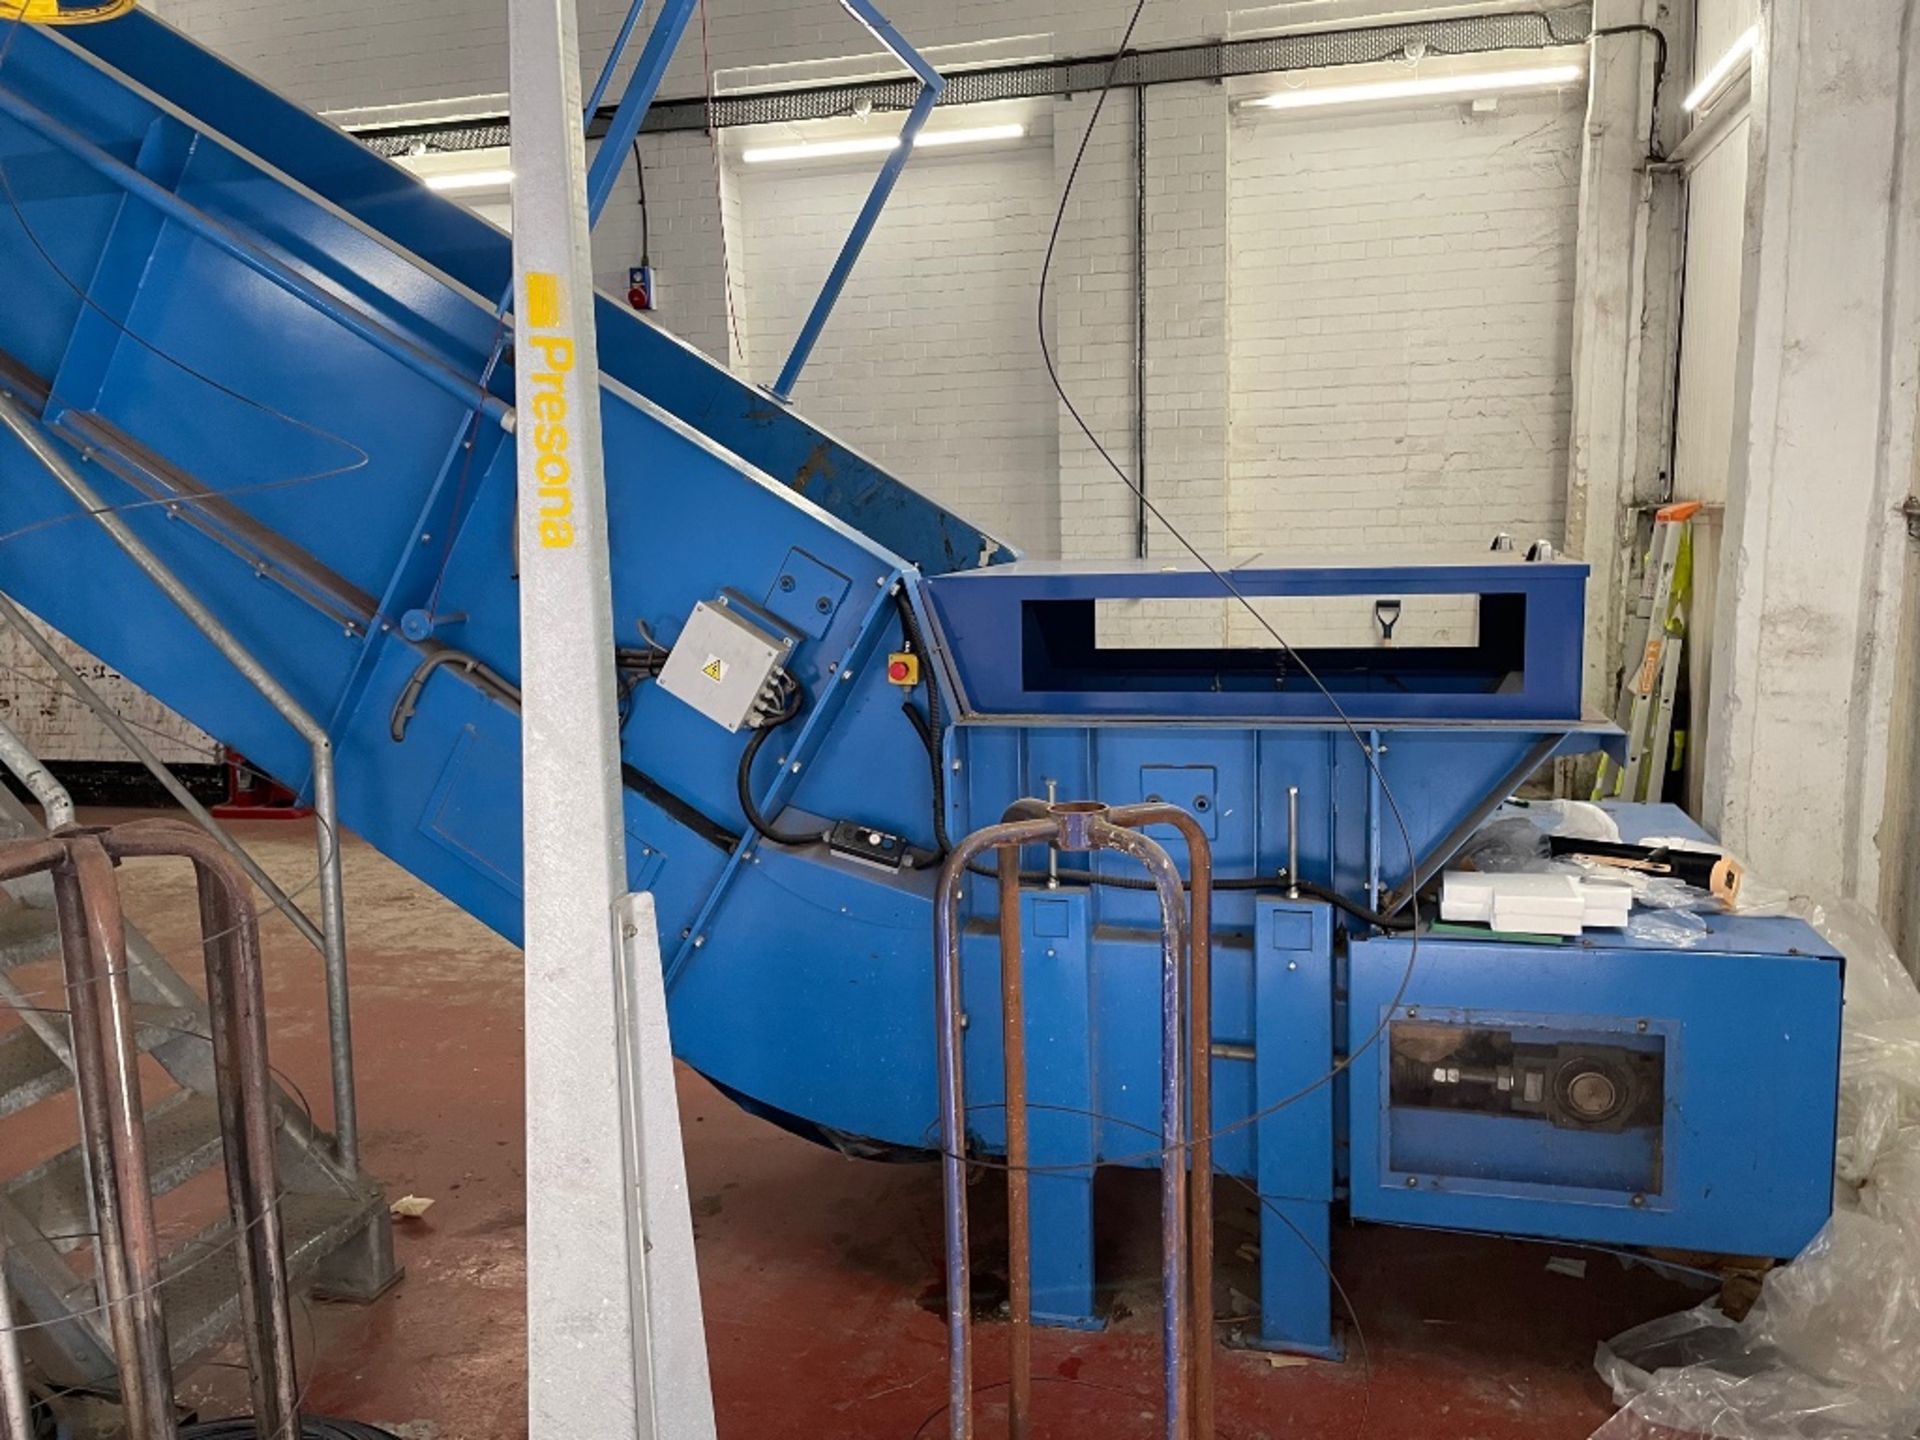 Presona LP 50 VH1 cardboard baler, Serial no. 5554, Year 2012 with 2 - inclined infeed conveyors, - Image 3 of 10